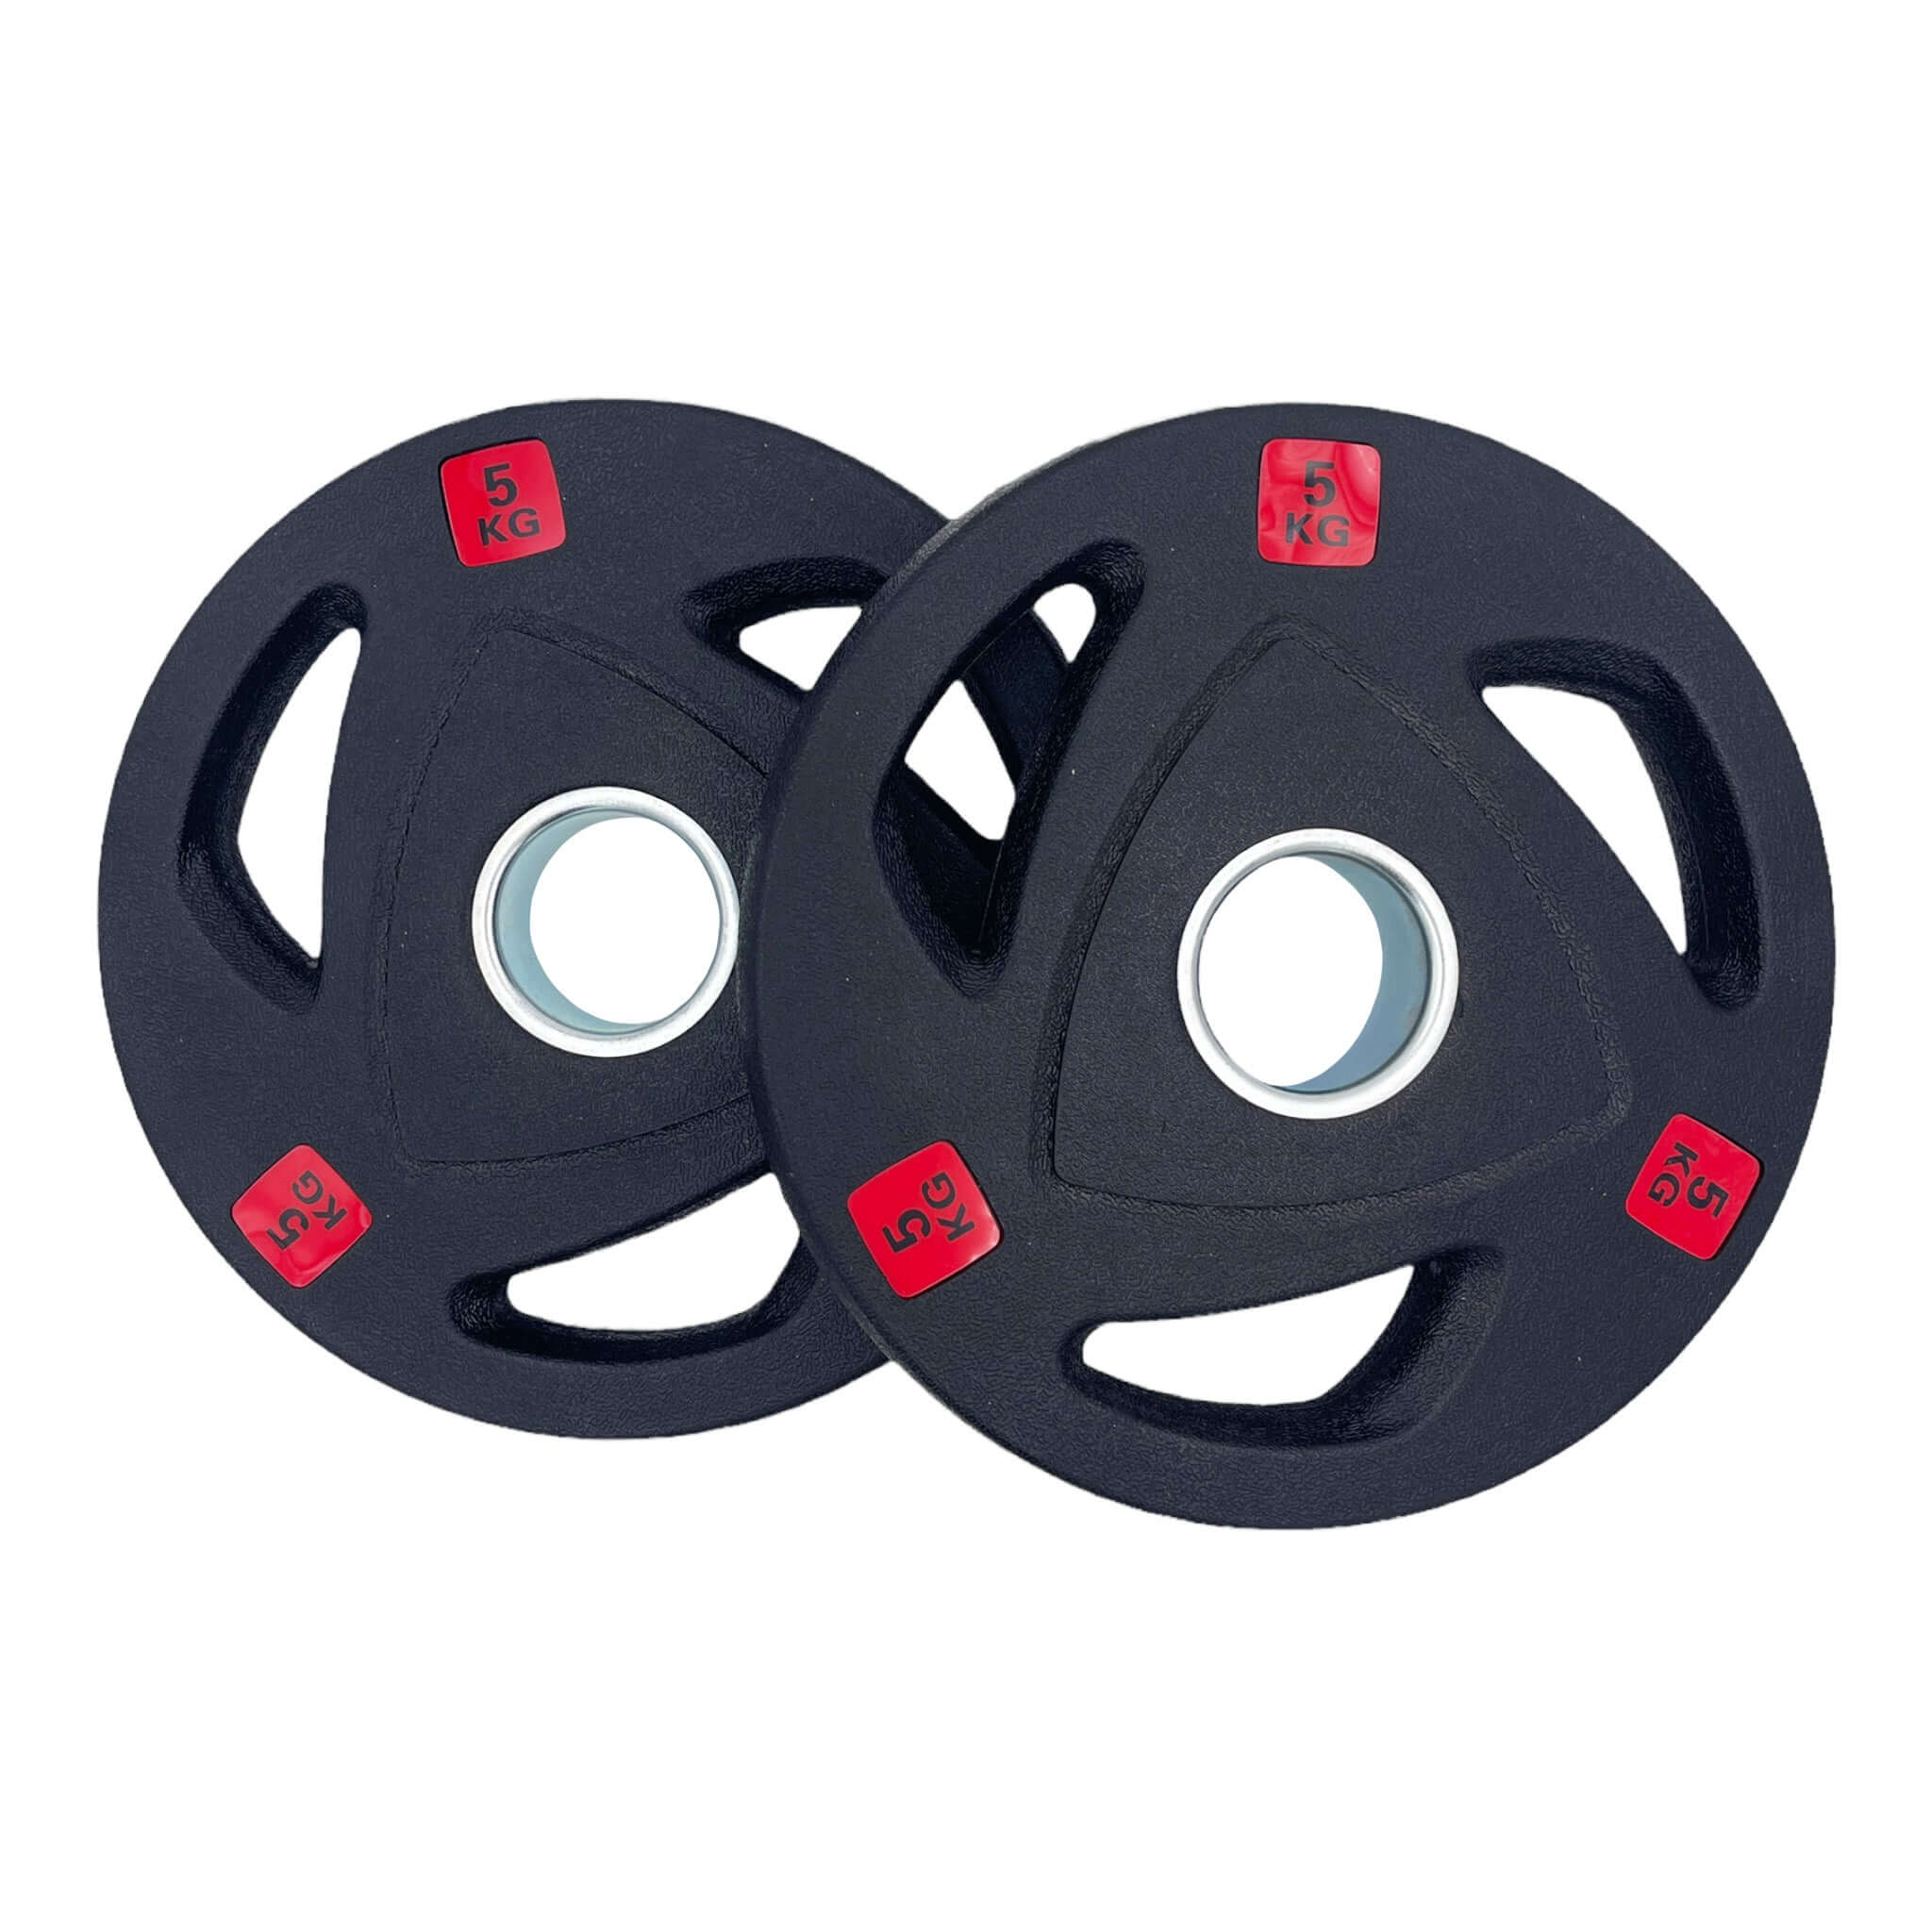 5kg Rubber Tri-grip Weight Plates Type-A Pair | INSOURCE